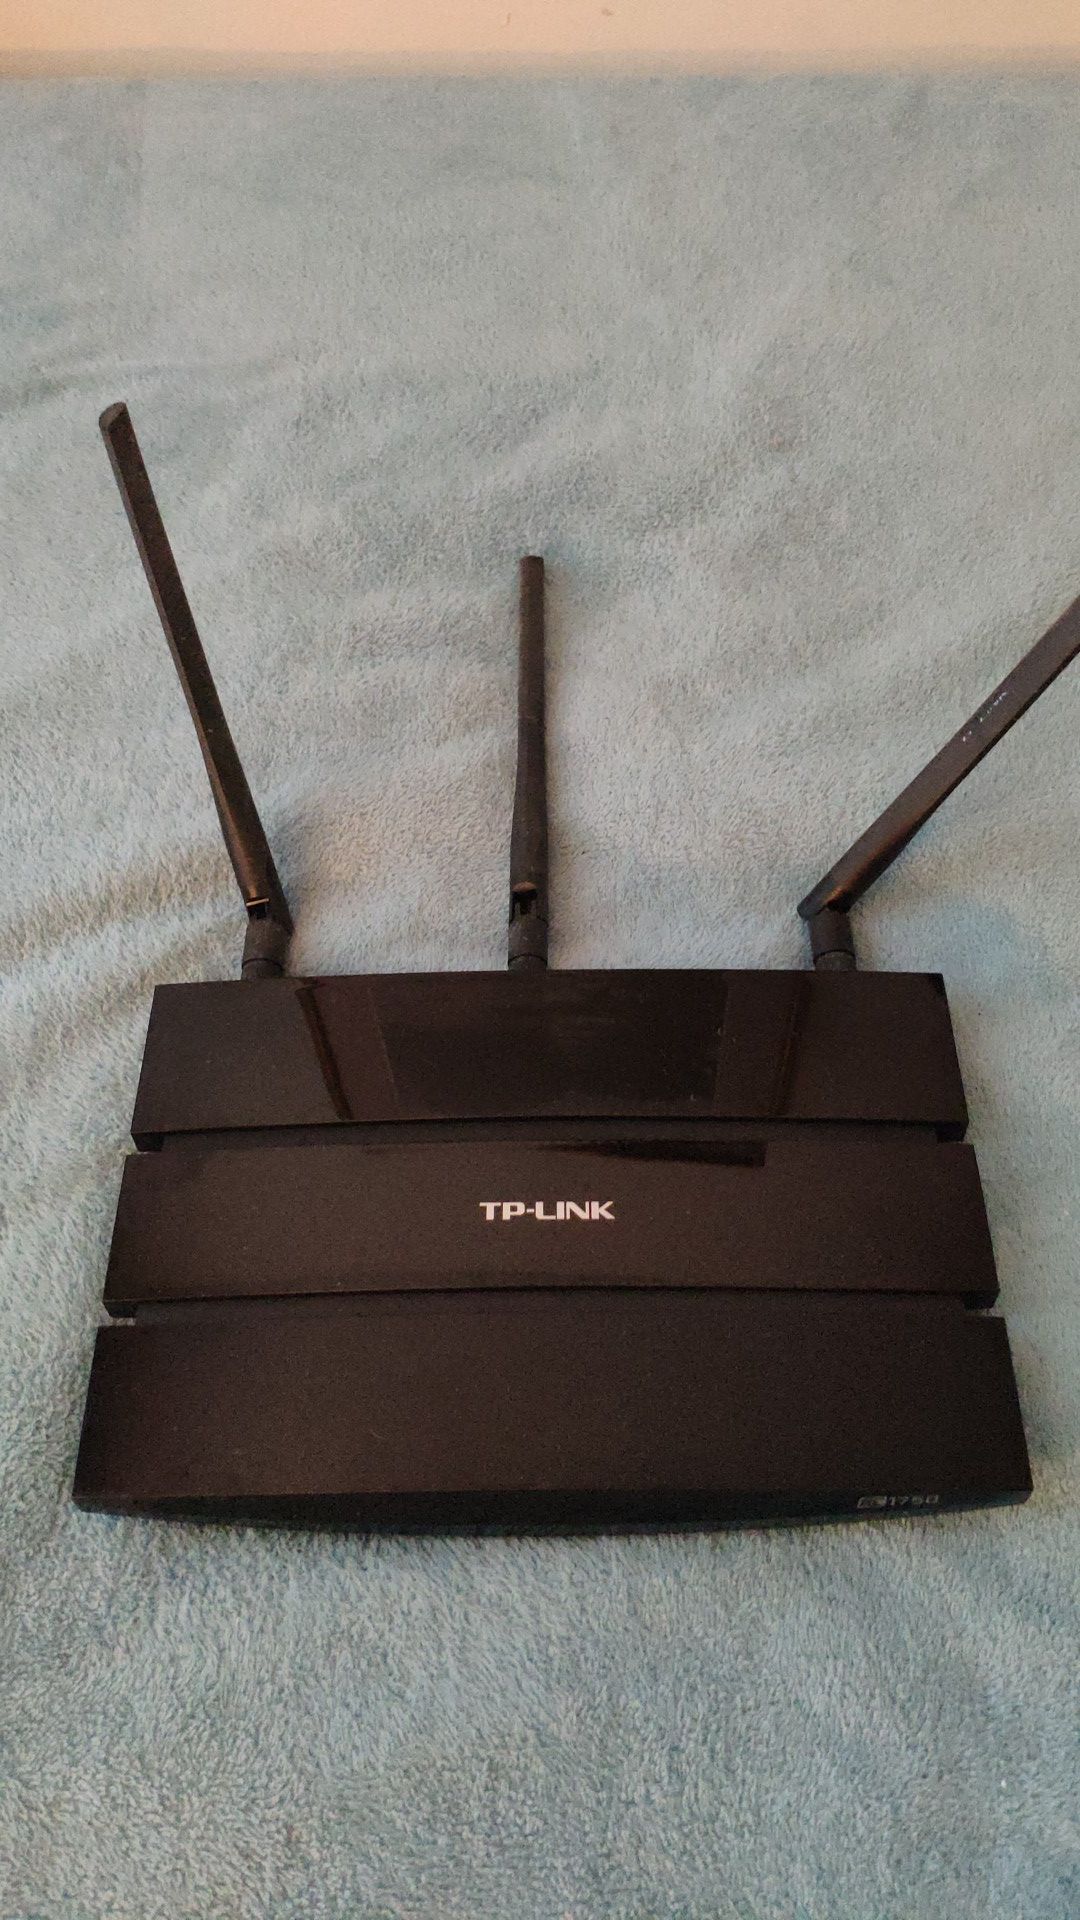 TP Link AC1750 router